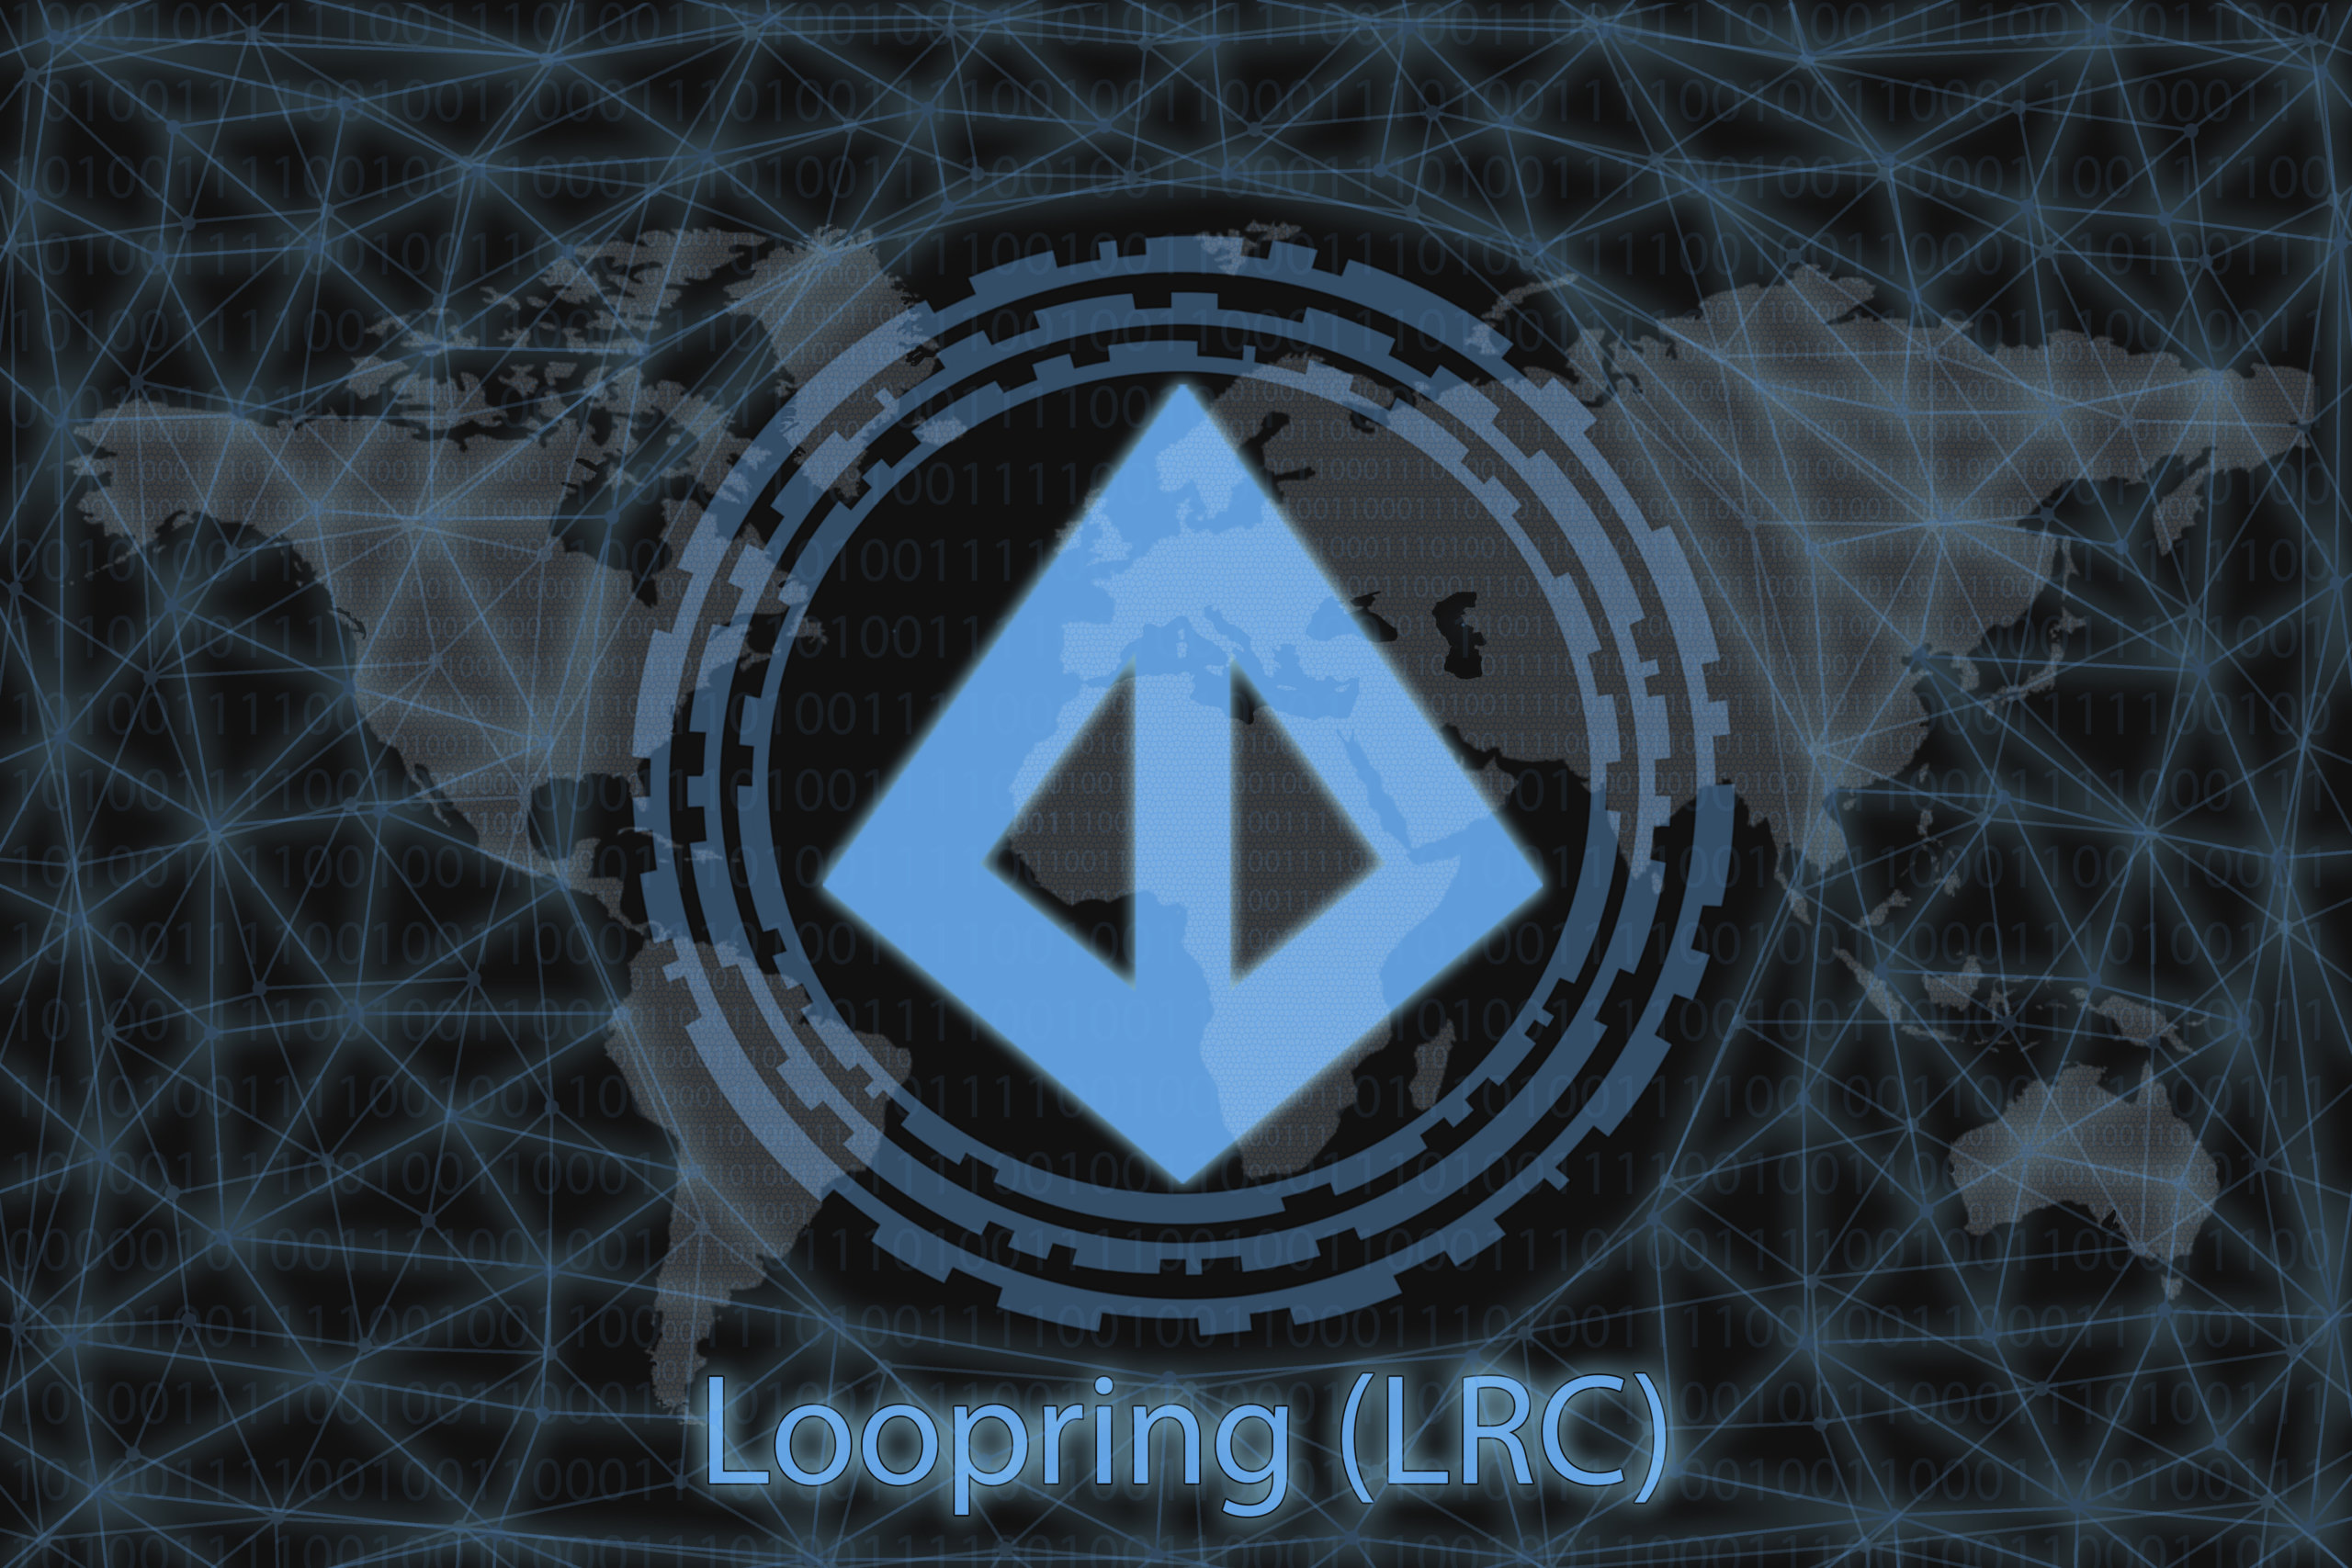 Should I buy Loopring(LRC) after surging more than 90%?